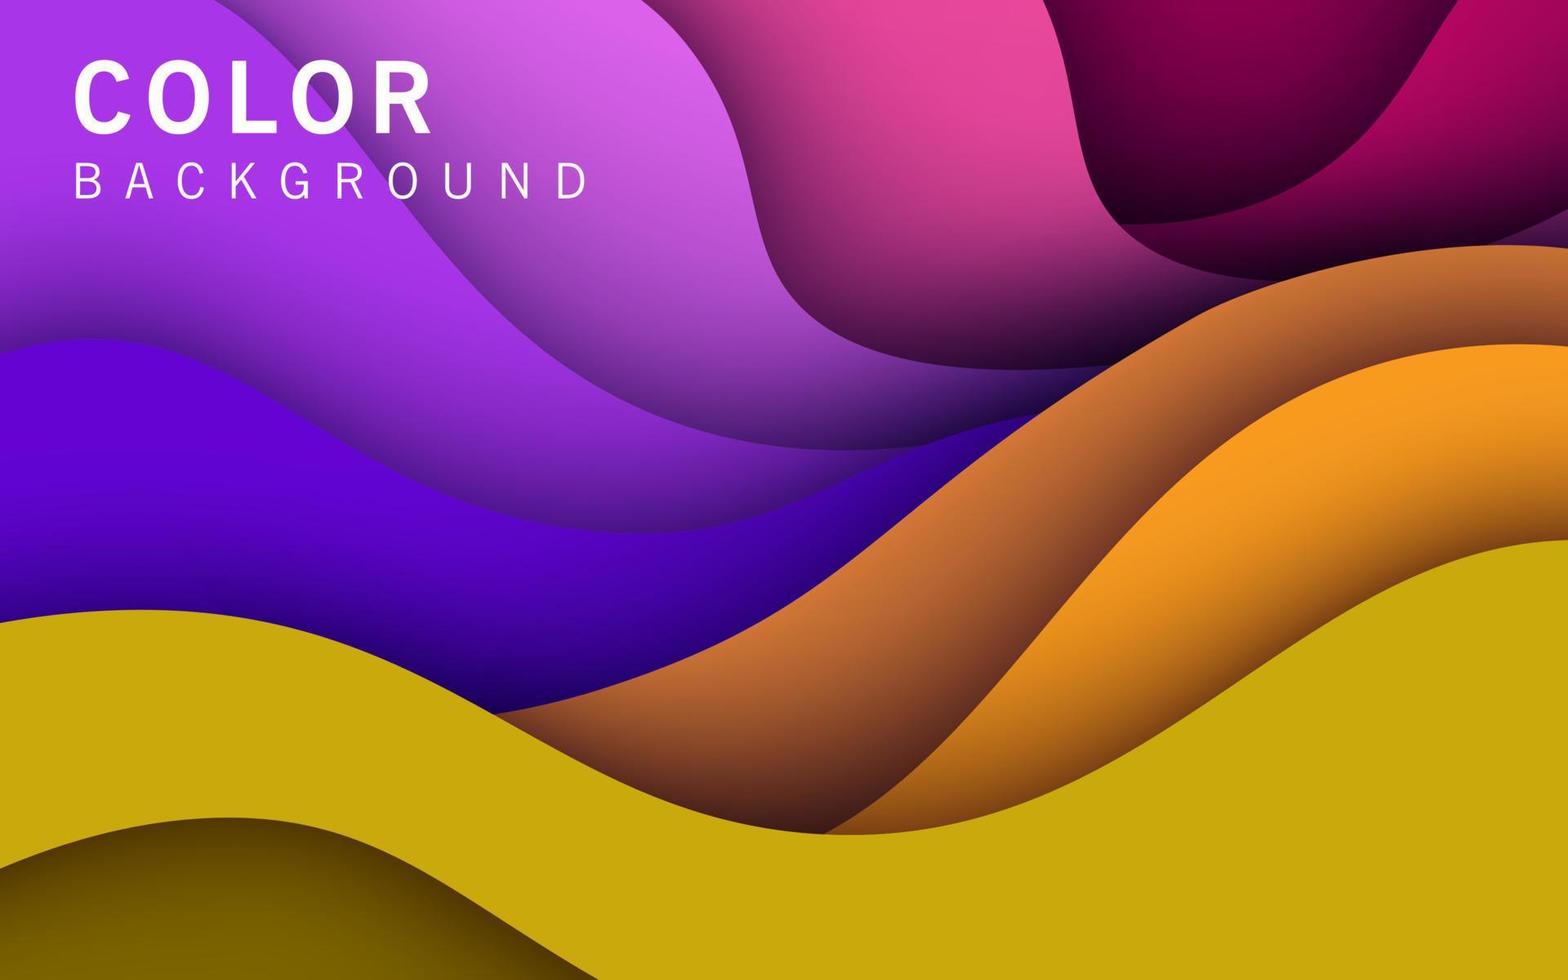 multi colored abstract yellow, orange, pink and purple wavy papercut overlap layers background. eps10 vector